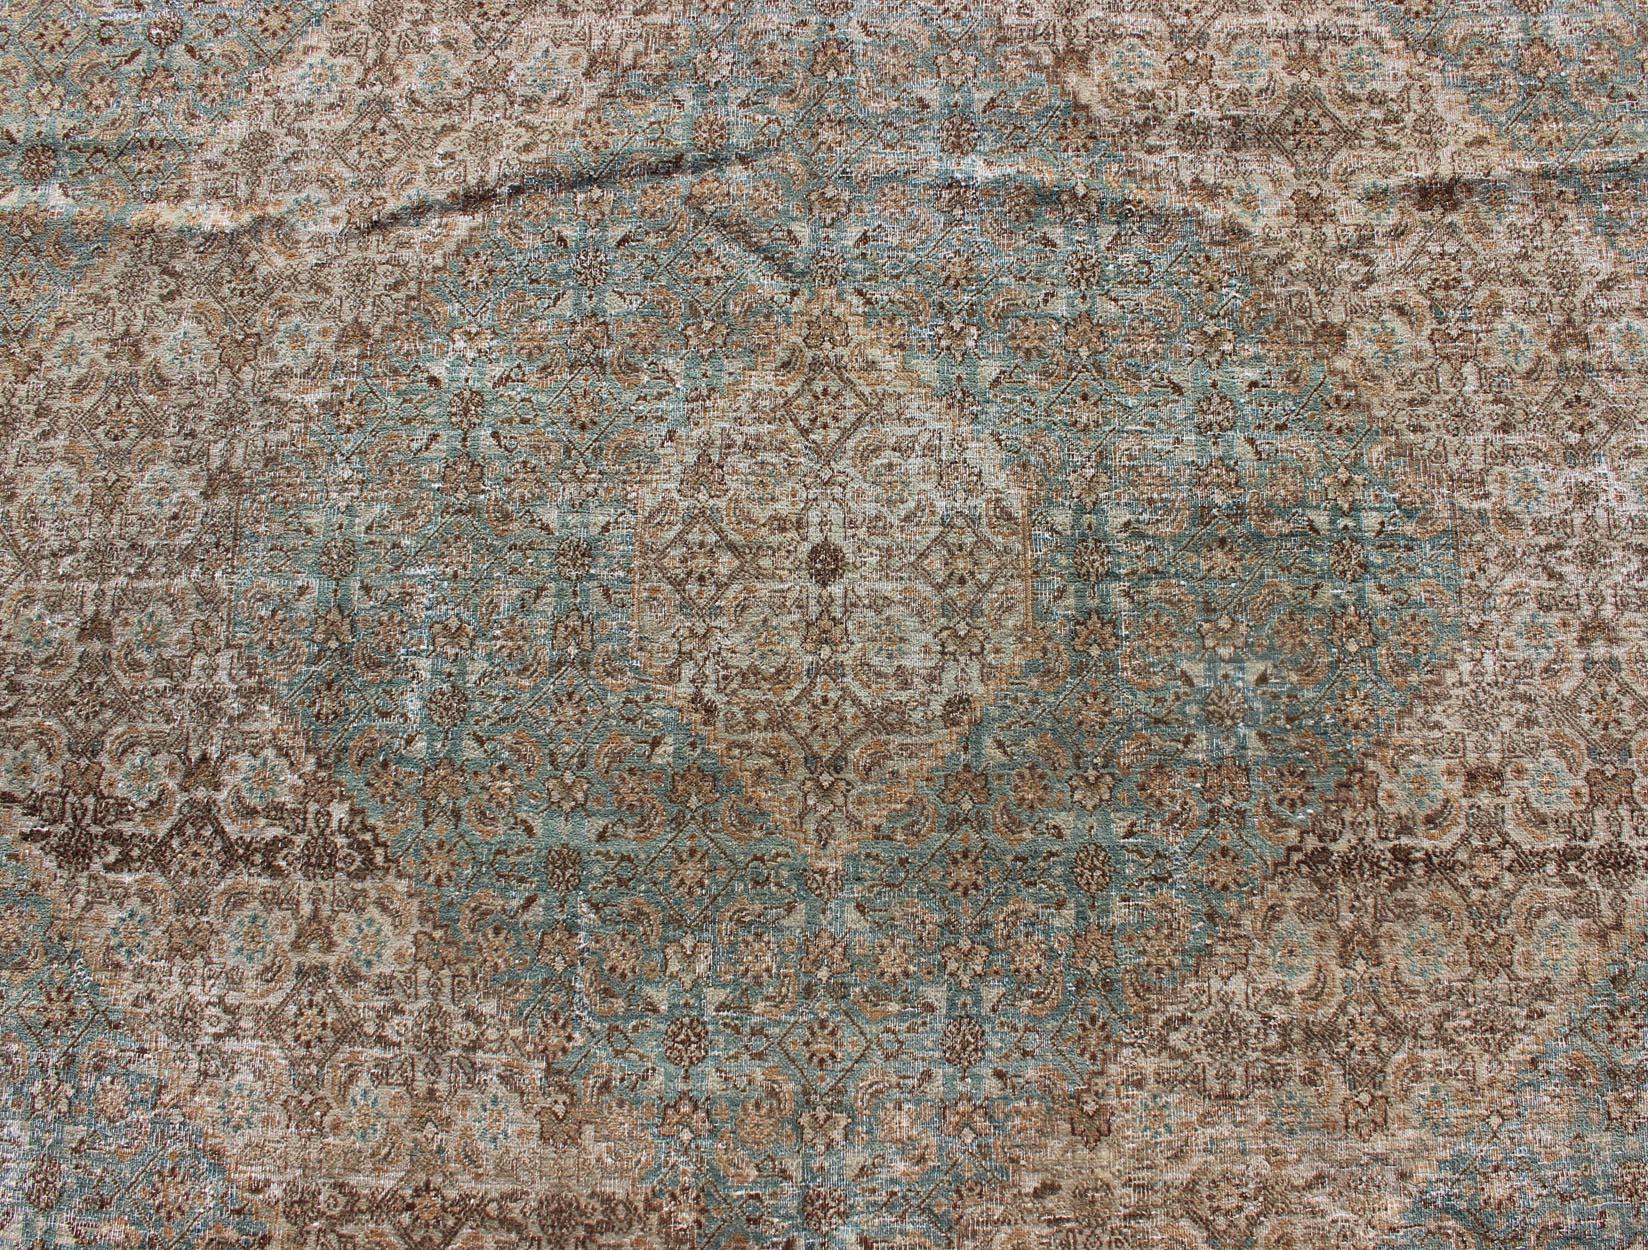 Antique Persian Khorassan Rug with a Geometric Diamond Design in Teal and Brown For Sale 5